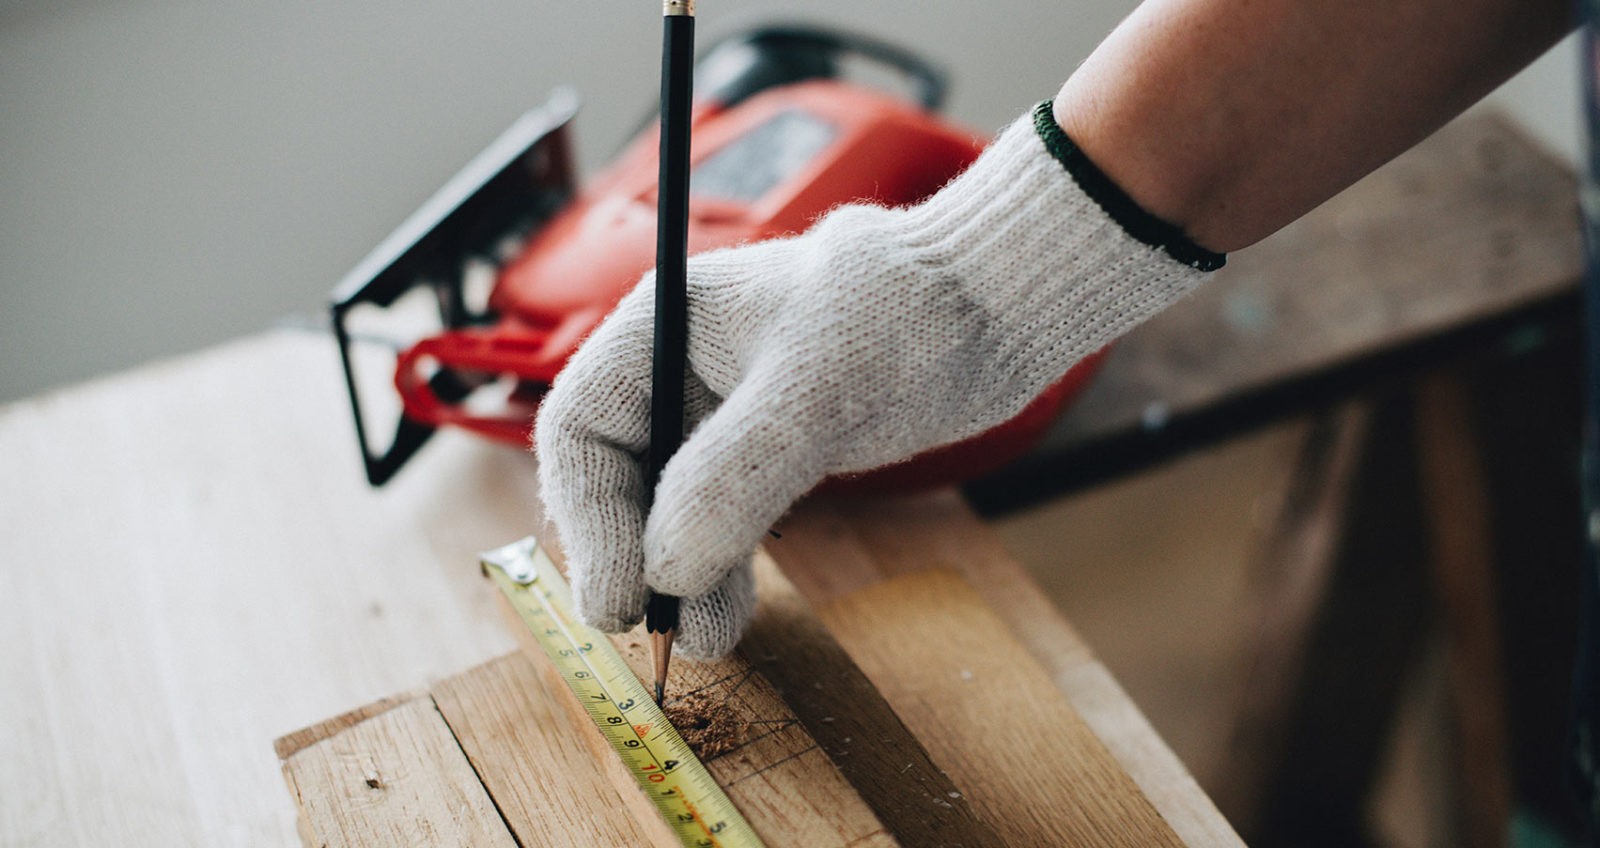 hand with glove holding pencil against piece of wood and tape measurer next to a power saw